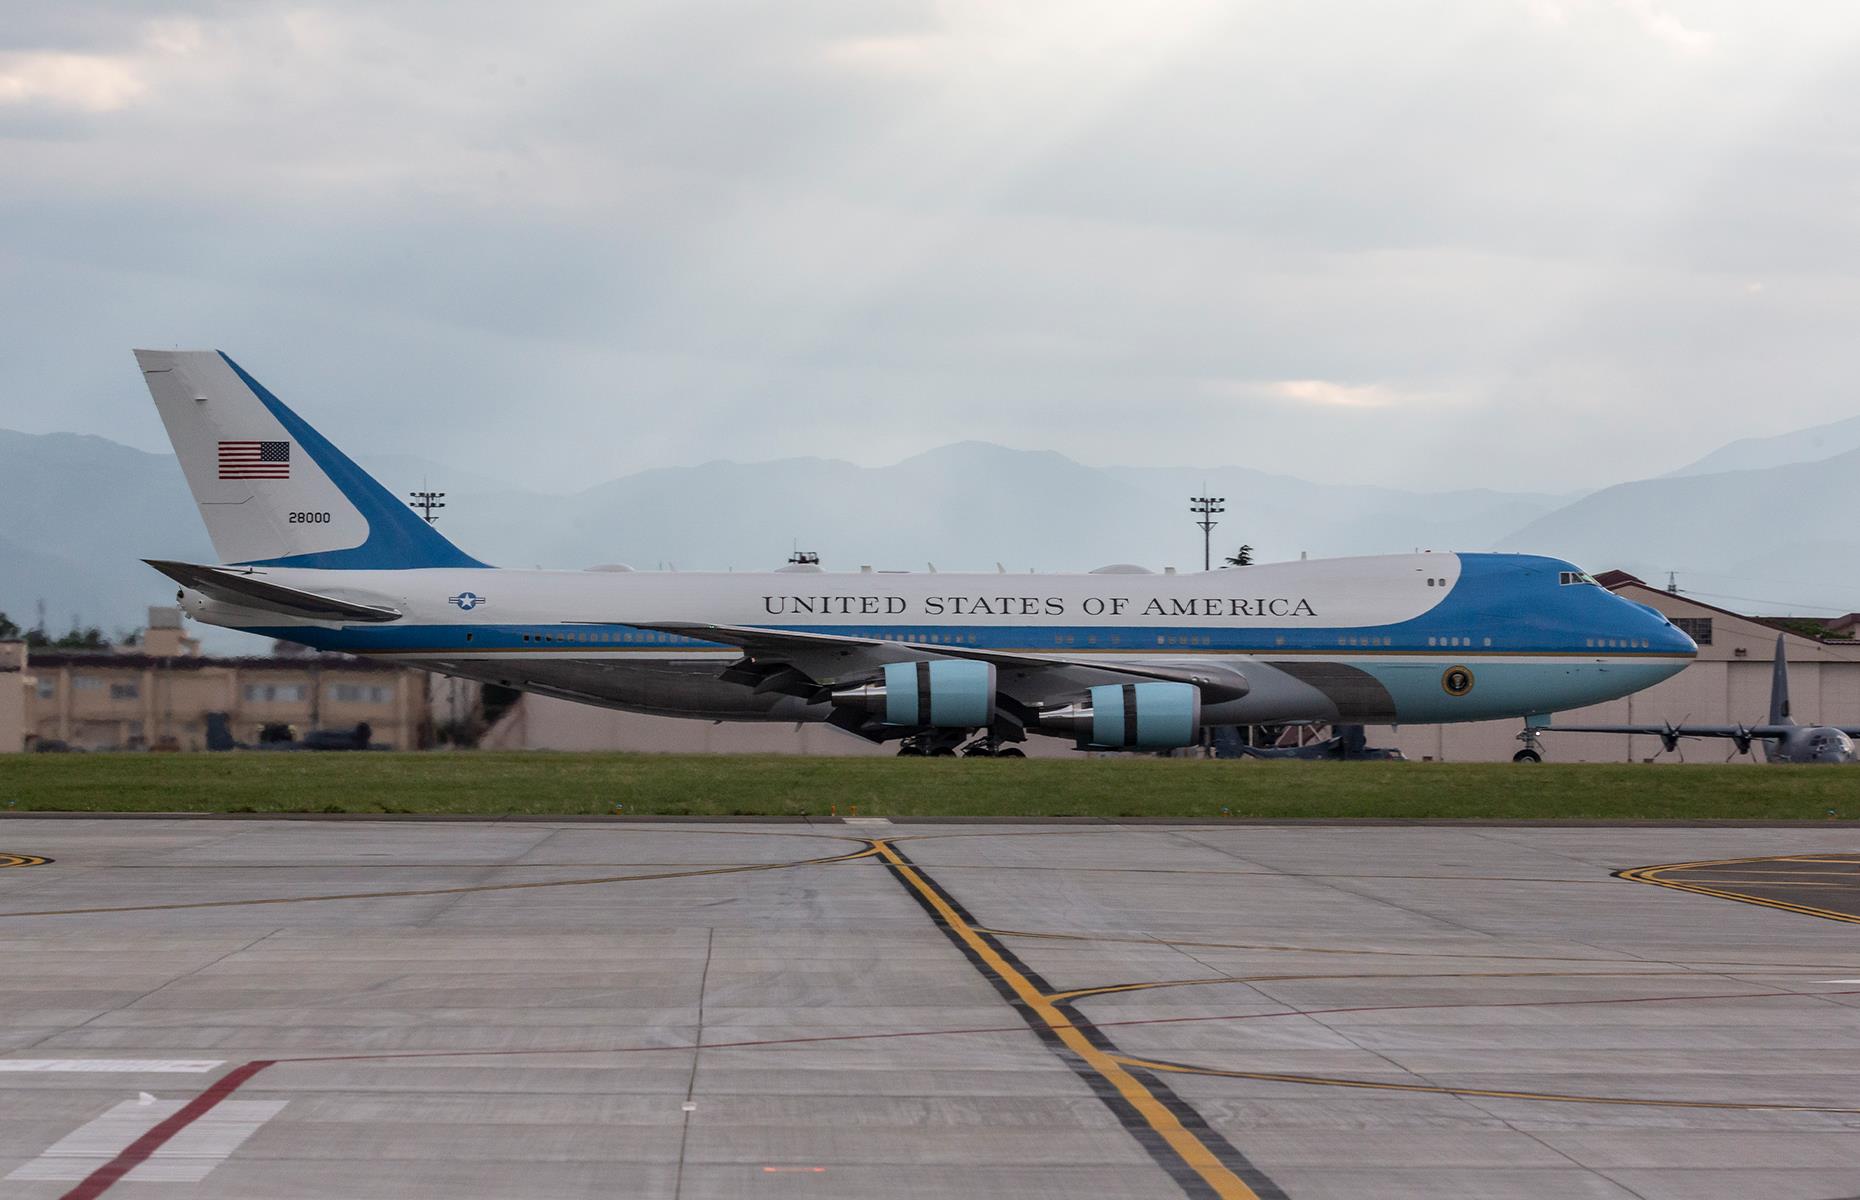 <p>Air Force One is the name given to the two fully kitted-out and highly customized Boeing private jets used by the US president.</p>  <p>When flying with Air Force One, President Biden has three levels of facilities at his fingertips, including a large office and a conference room. There's also a medical space, complete with operating room, and a doctor is always on board should any type of emergency occur.</p>  <p>Separate areas can accommodate advisers or members of the press who are traveling with the president, and the plane’s double food preparation galleys can comfortably feed 100 people at a time.</p>